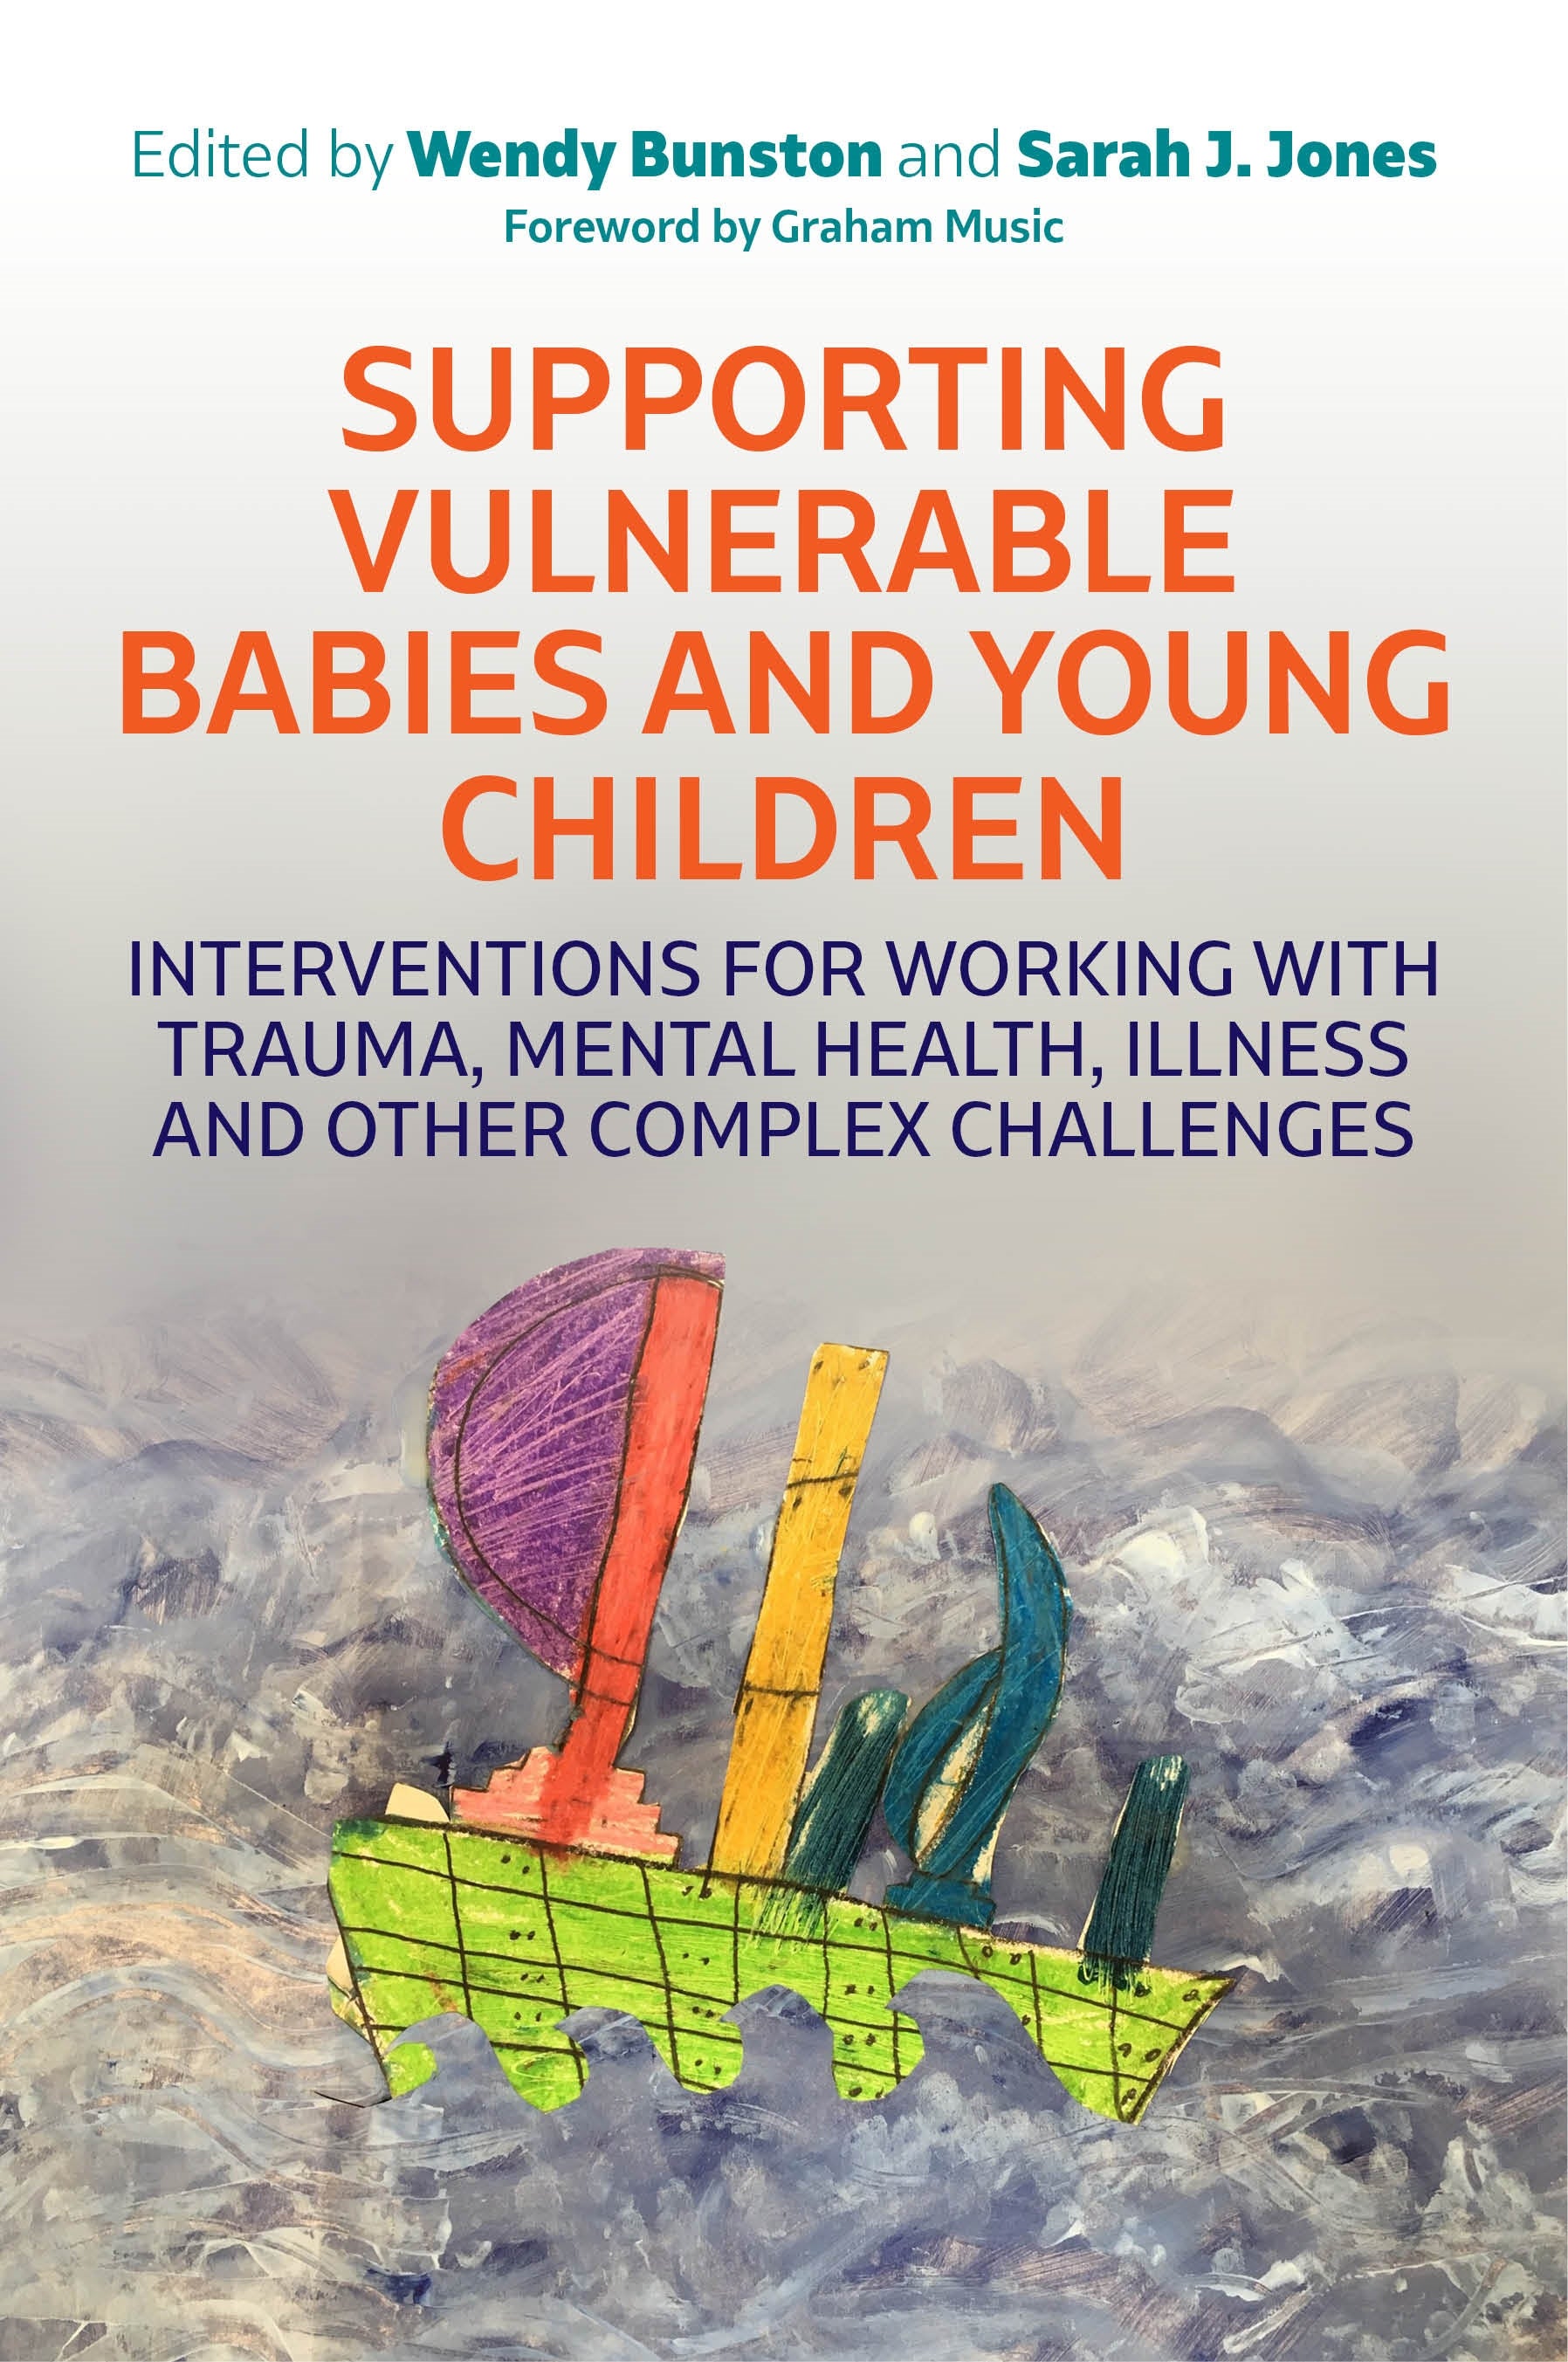 Supporting Vulnerable Babies and Young Children by Graham Music, Dr. Wendy Bunston, Sarah Jones, No Author Listed